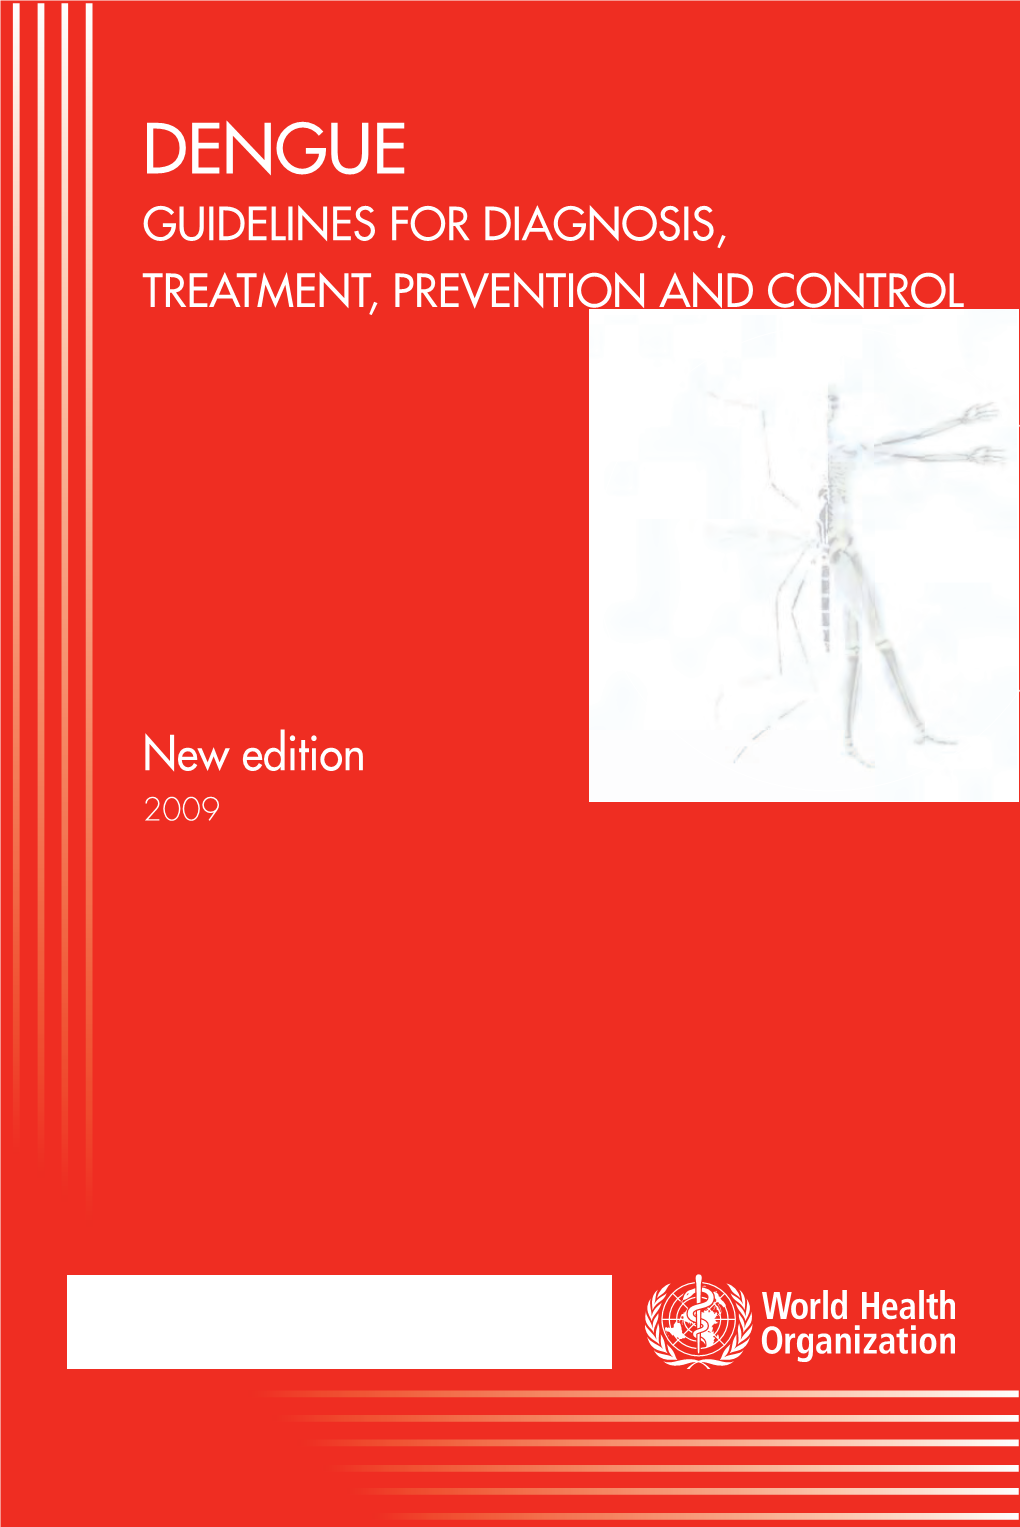 Dengue: Guidelines for Diagnosis, Treatment, Prevention and Control -- New Edition